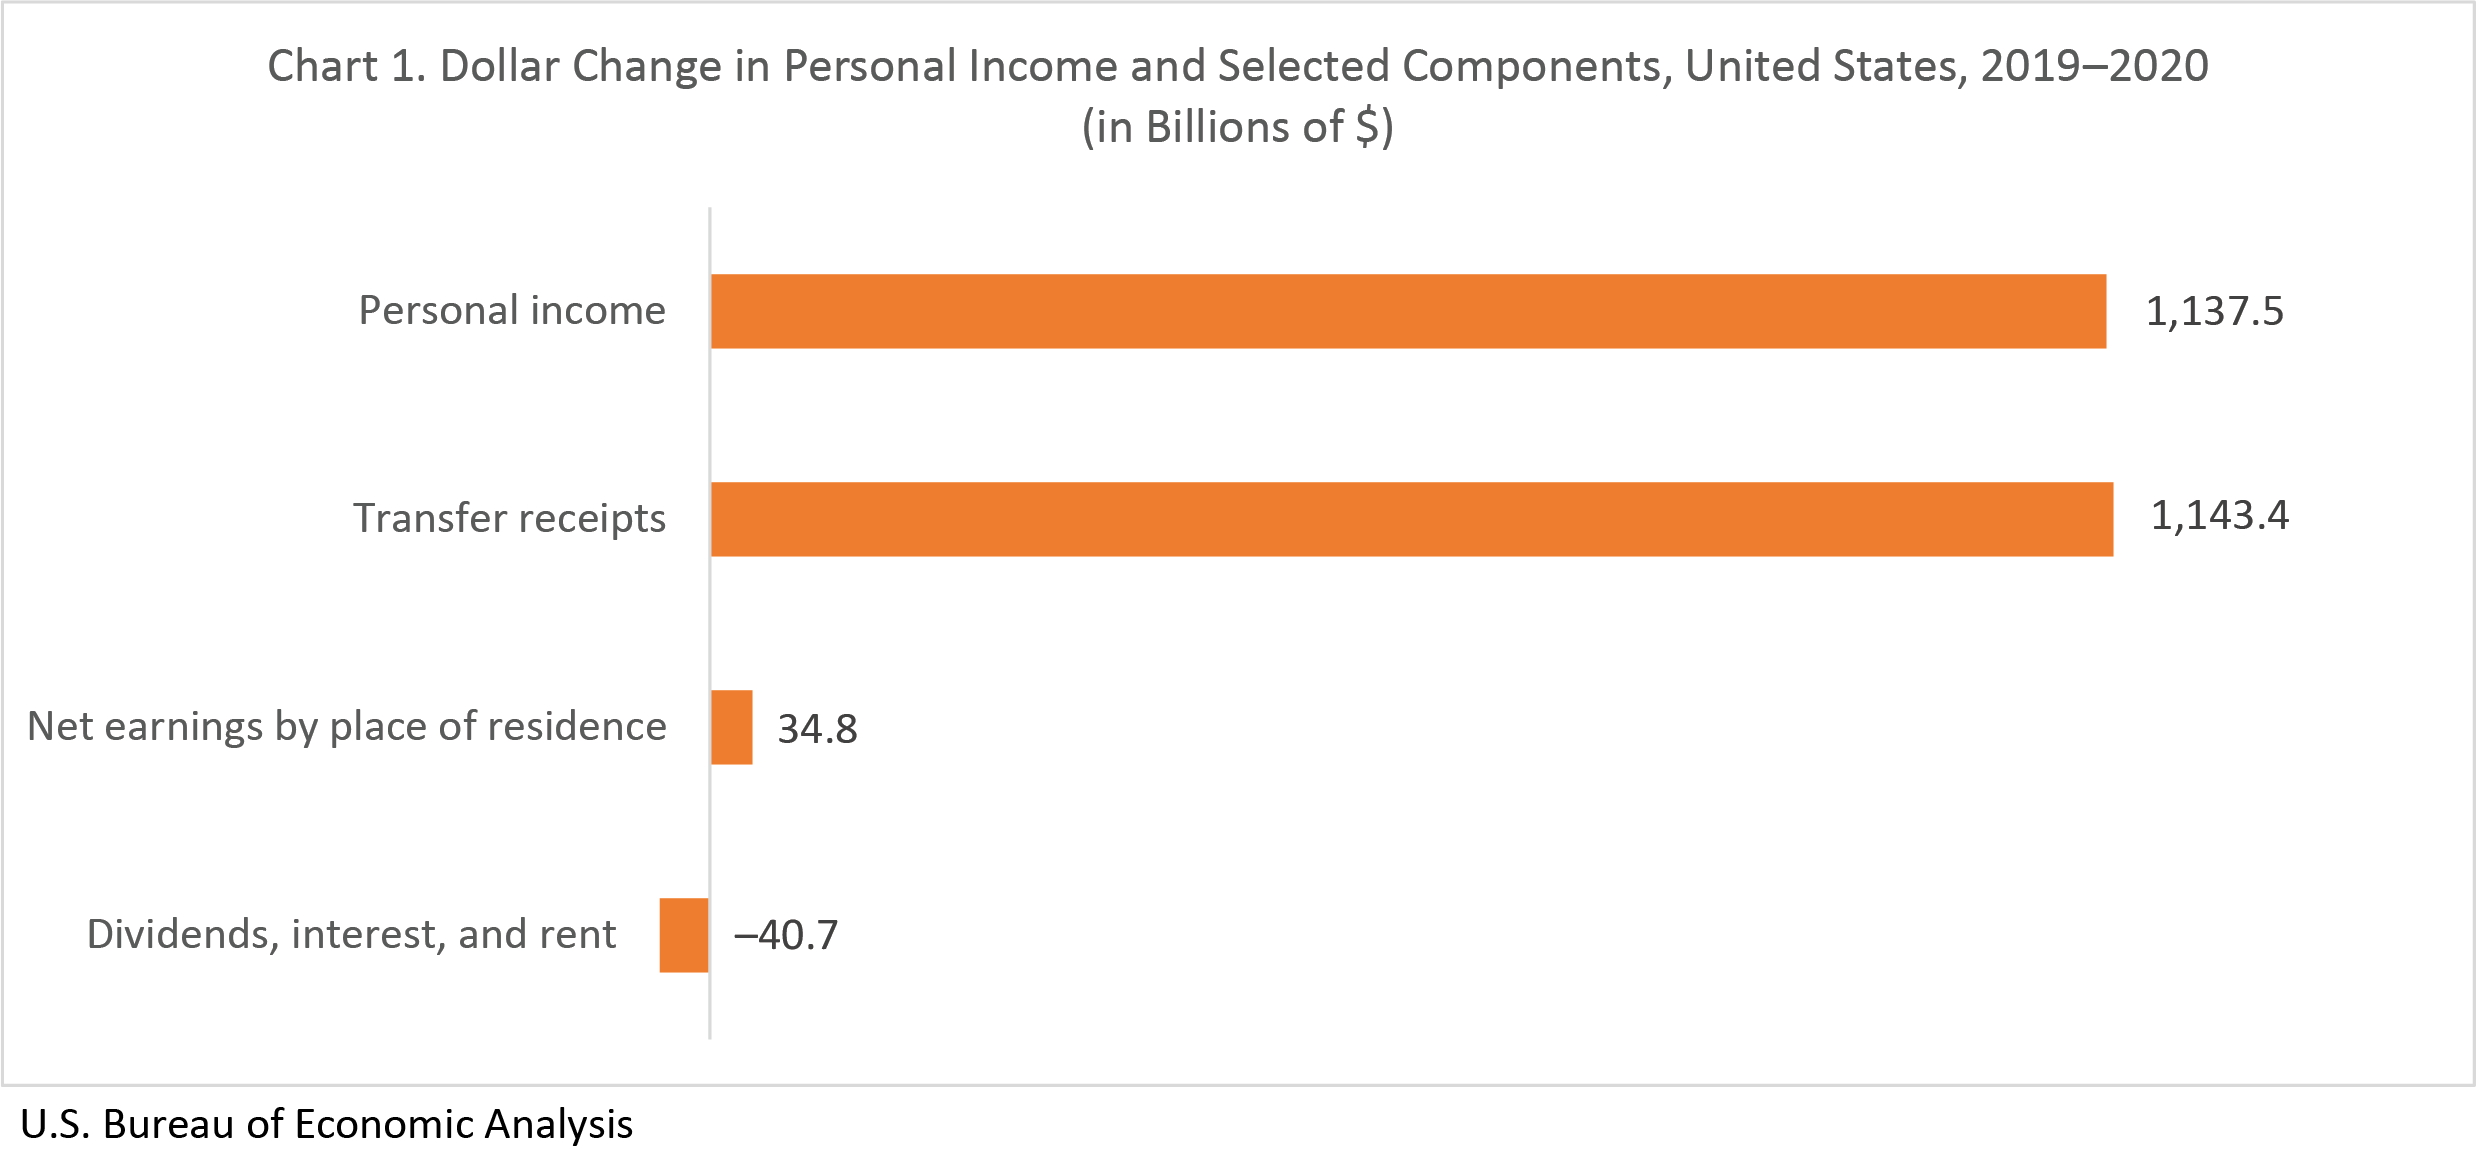 Chart1. Dollar Change in Personal Income and Selected Components, US, 2019-2020